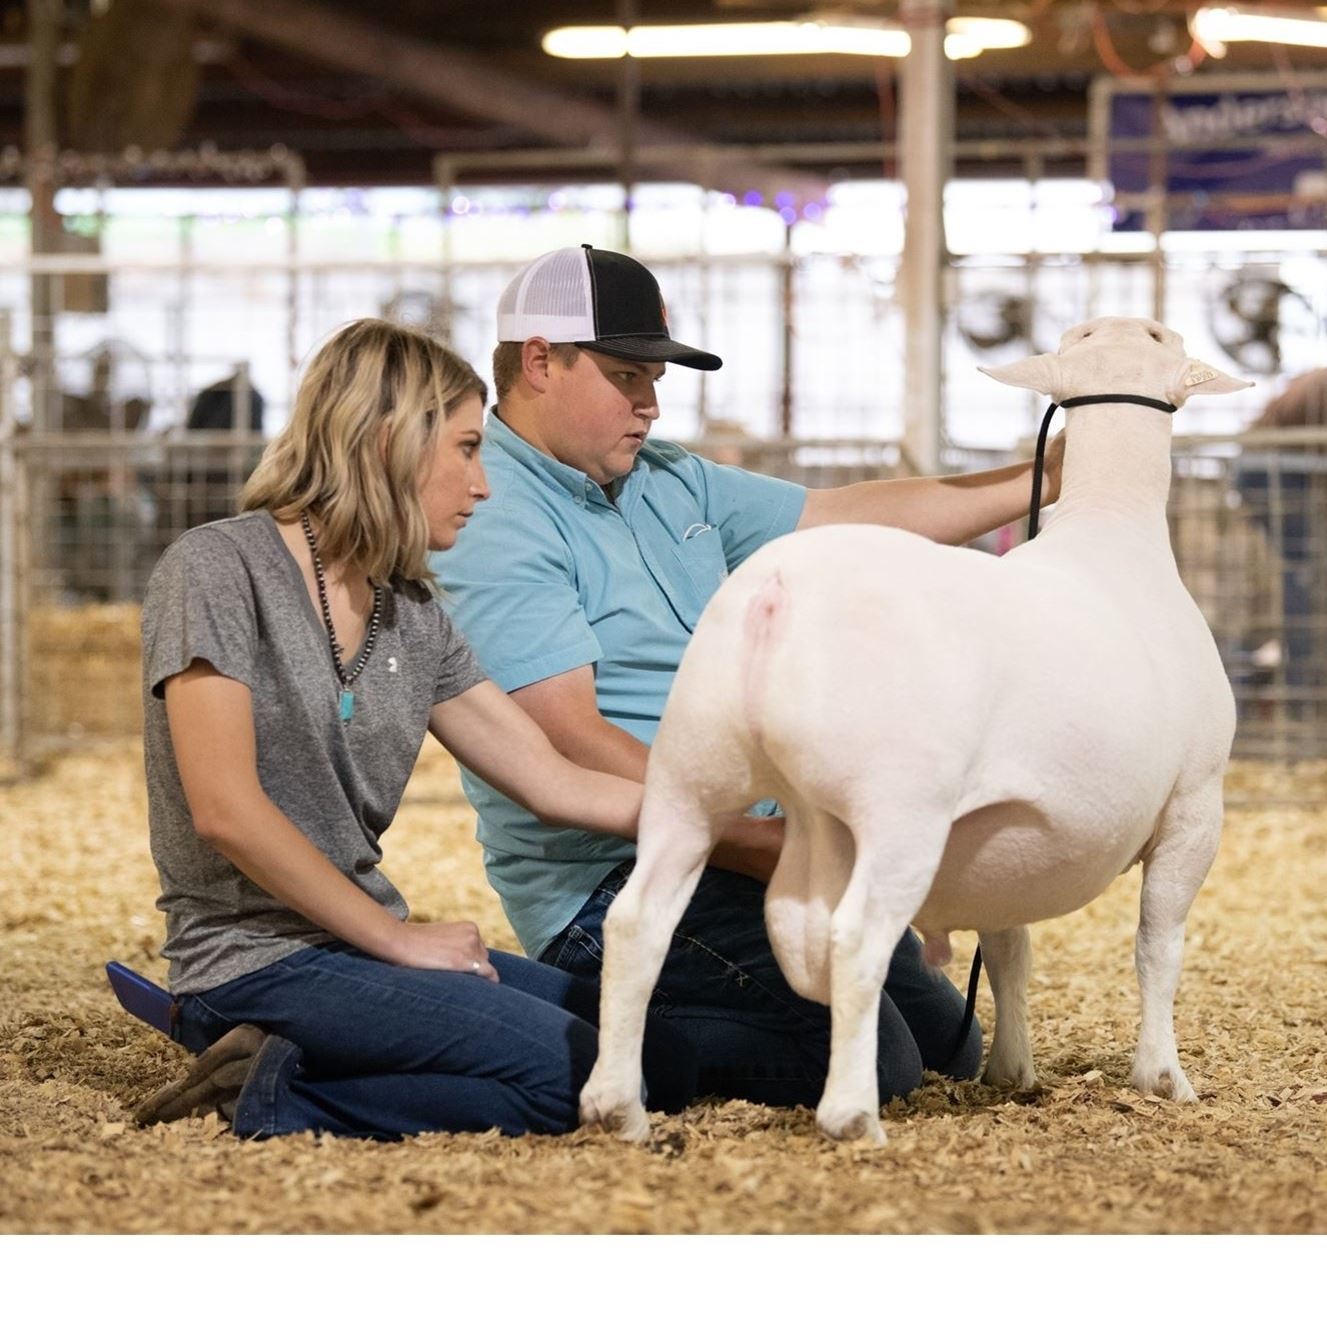 Man & woman kneeling in an arena showing a white sheep.